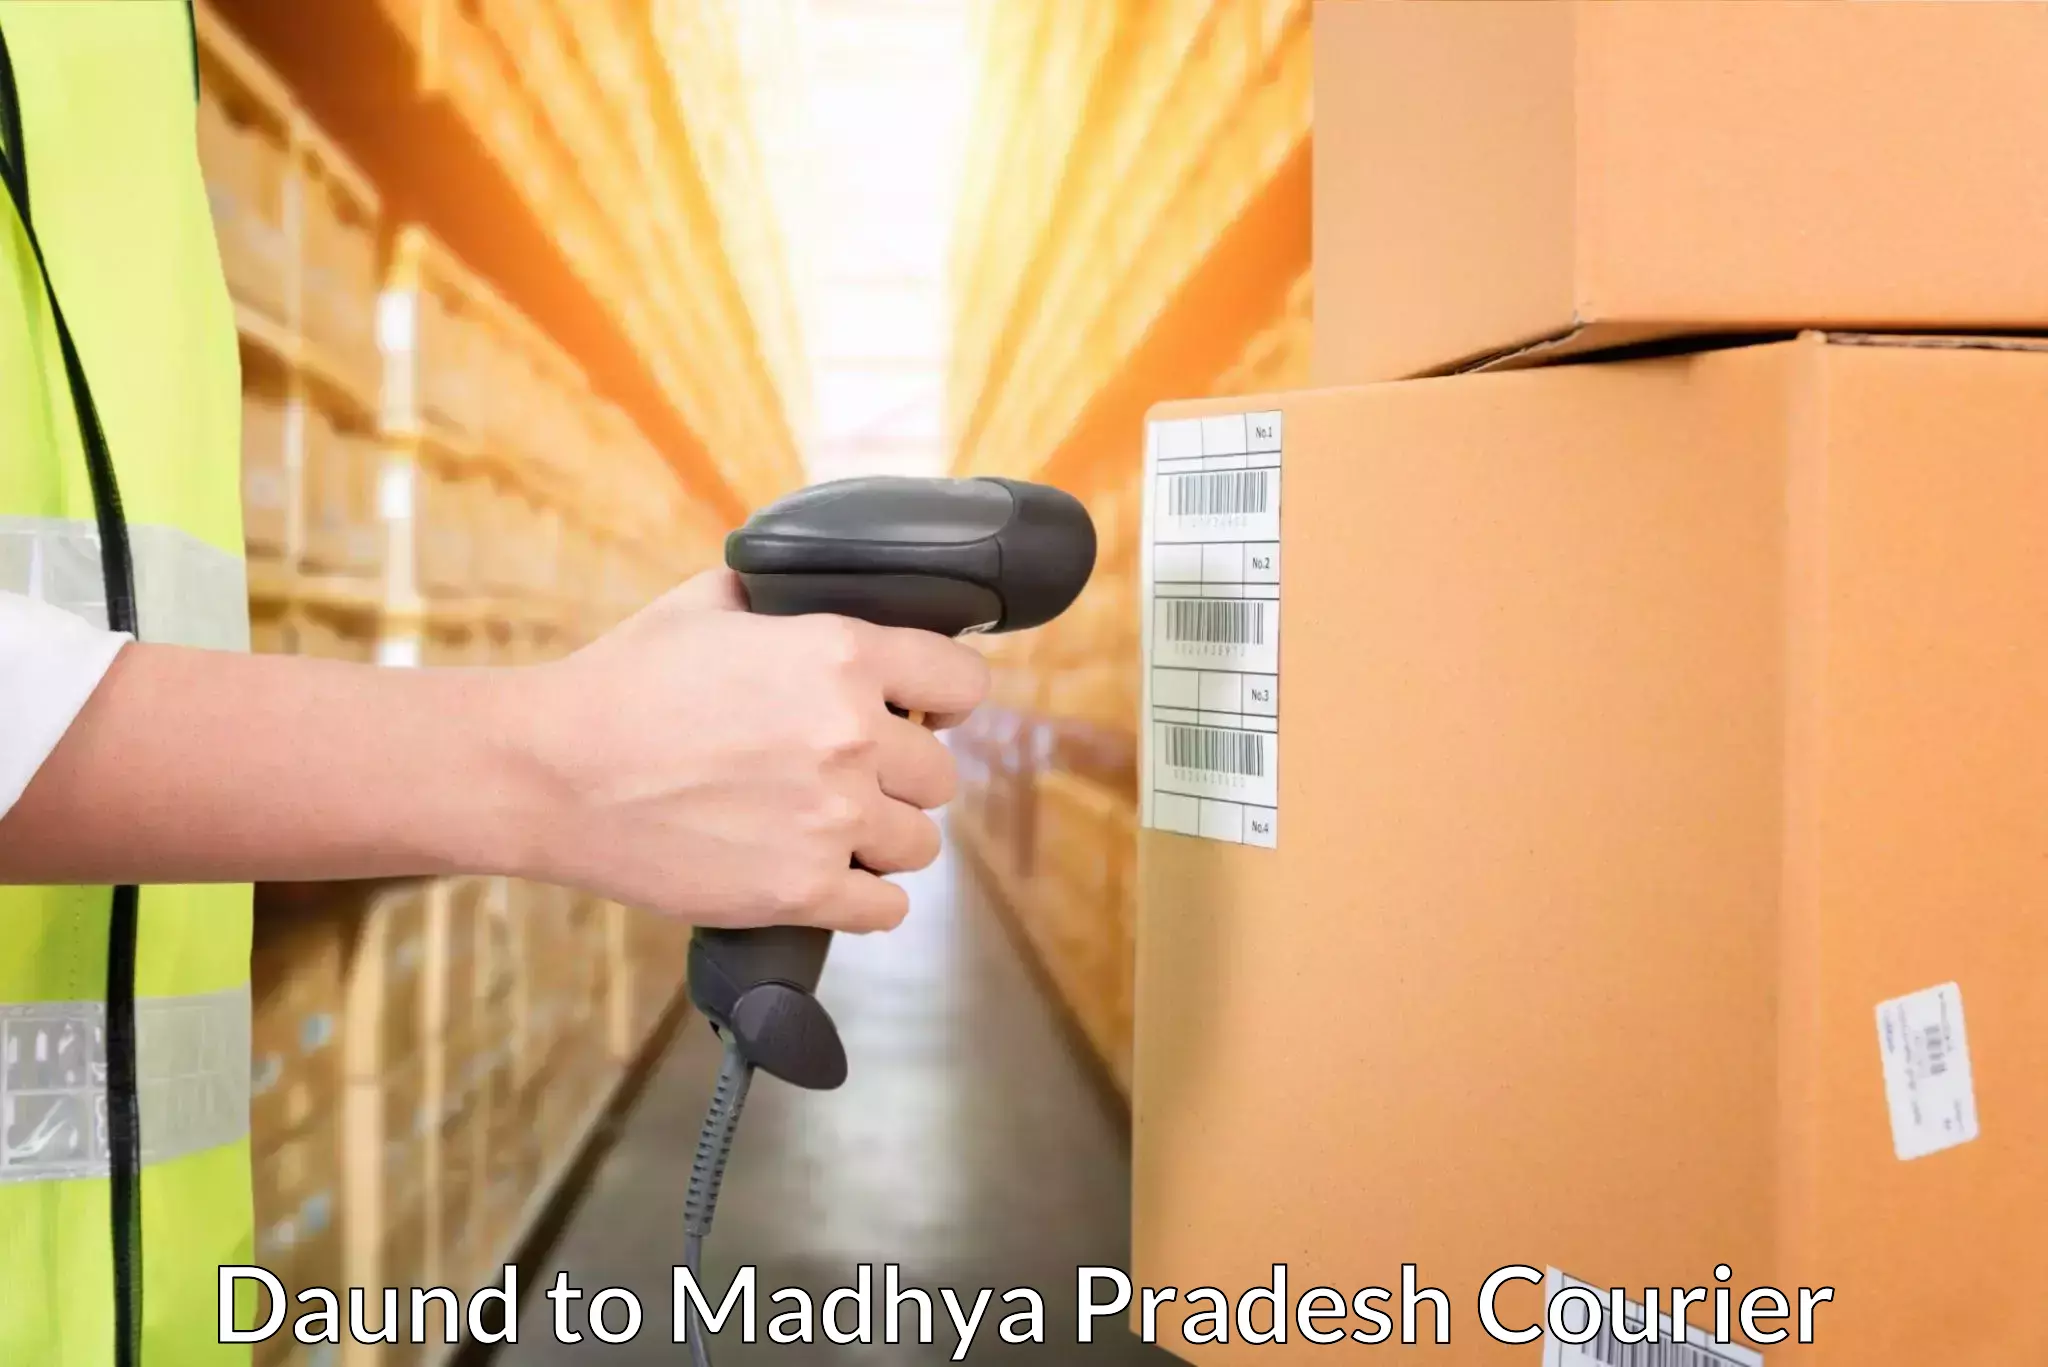 Quality courier partnerships Daund to Kukshi